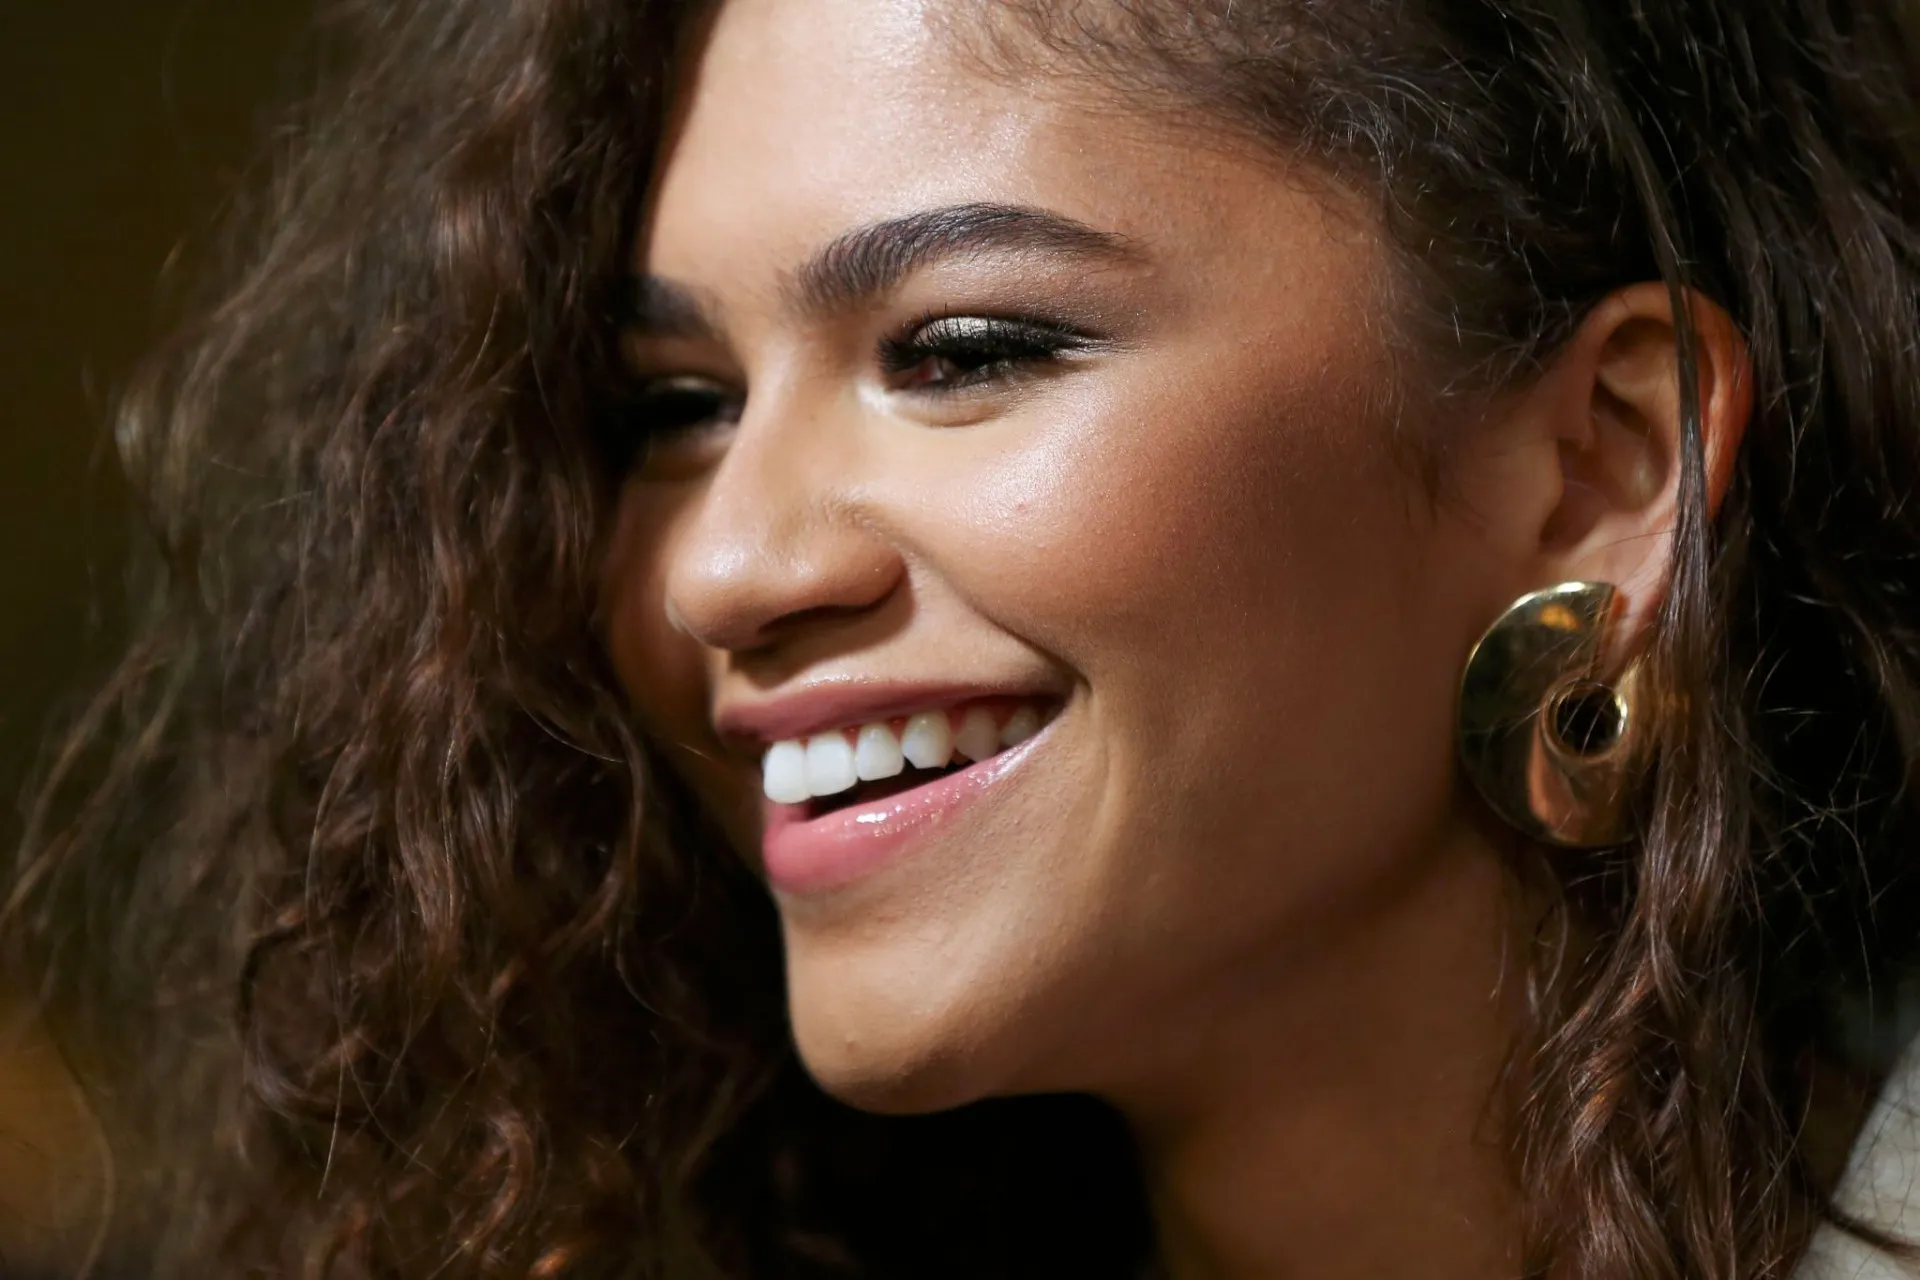 Fascinating! A photo of Zendaya without a bra against the backdrop of ...